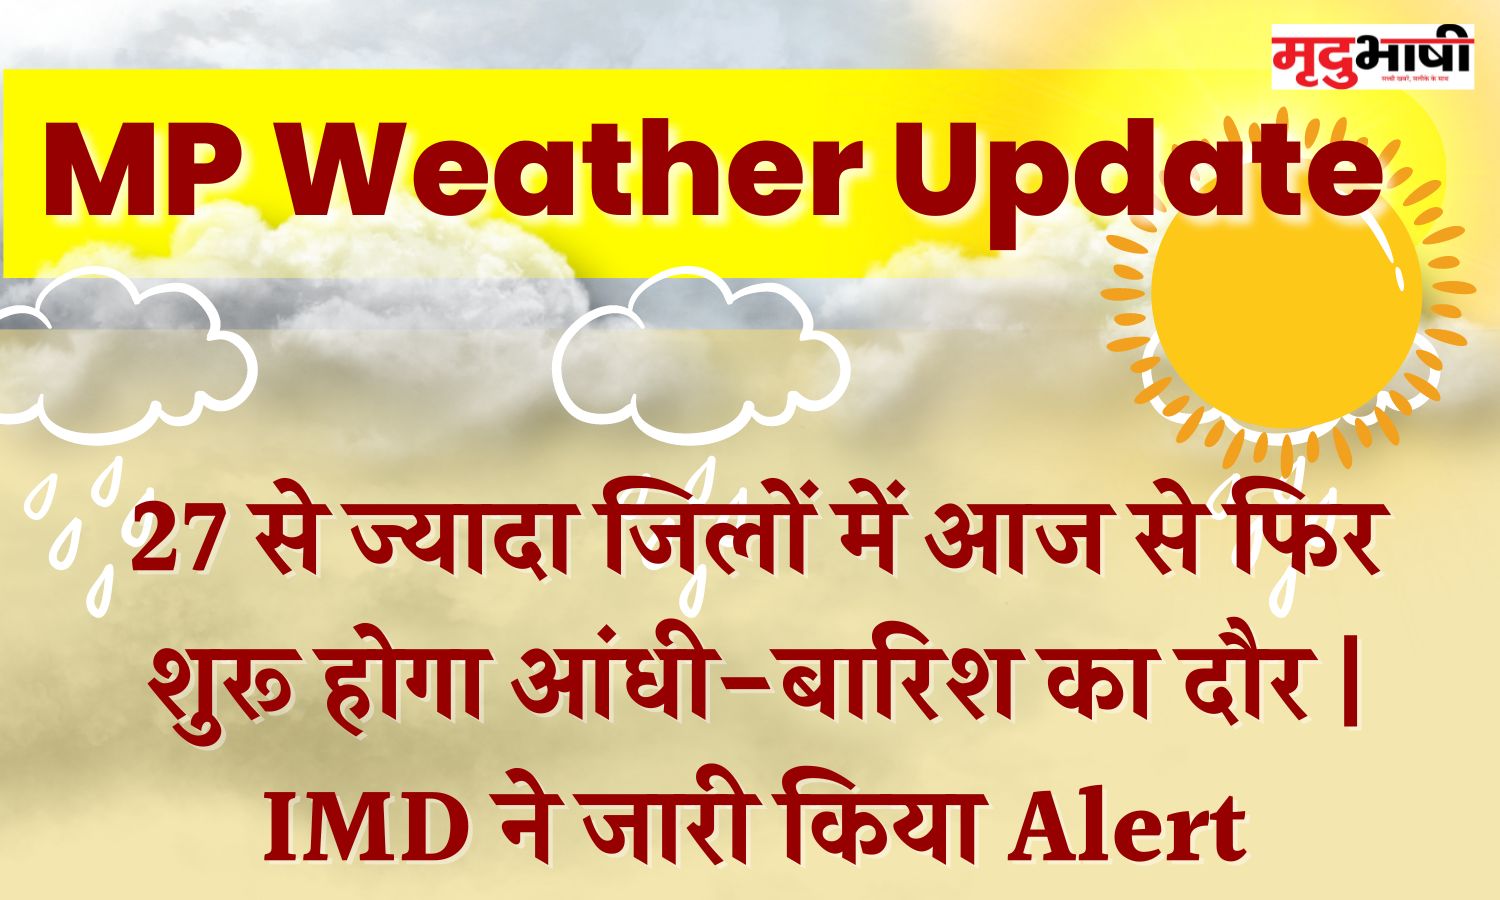 MP Weather Update: Sawan-like weather in the month of Vaishakh